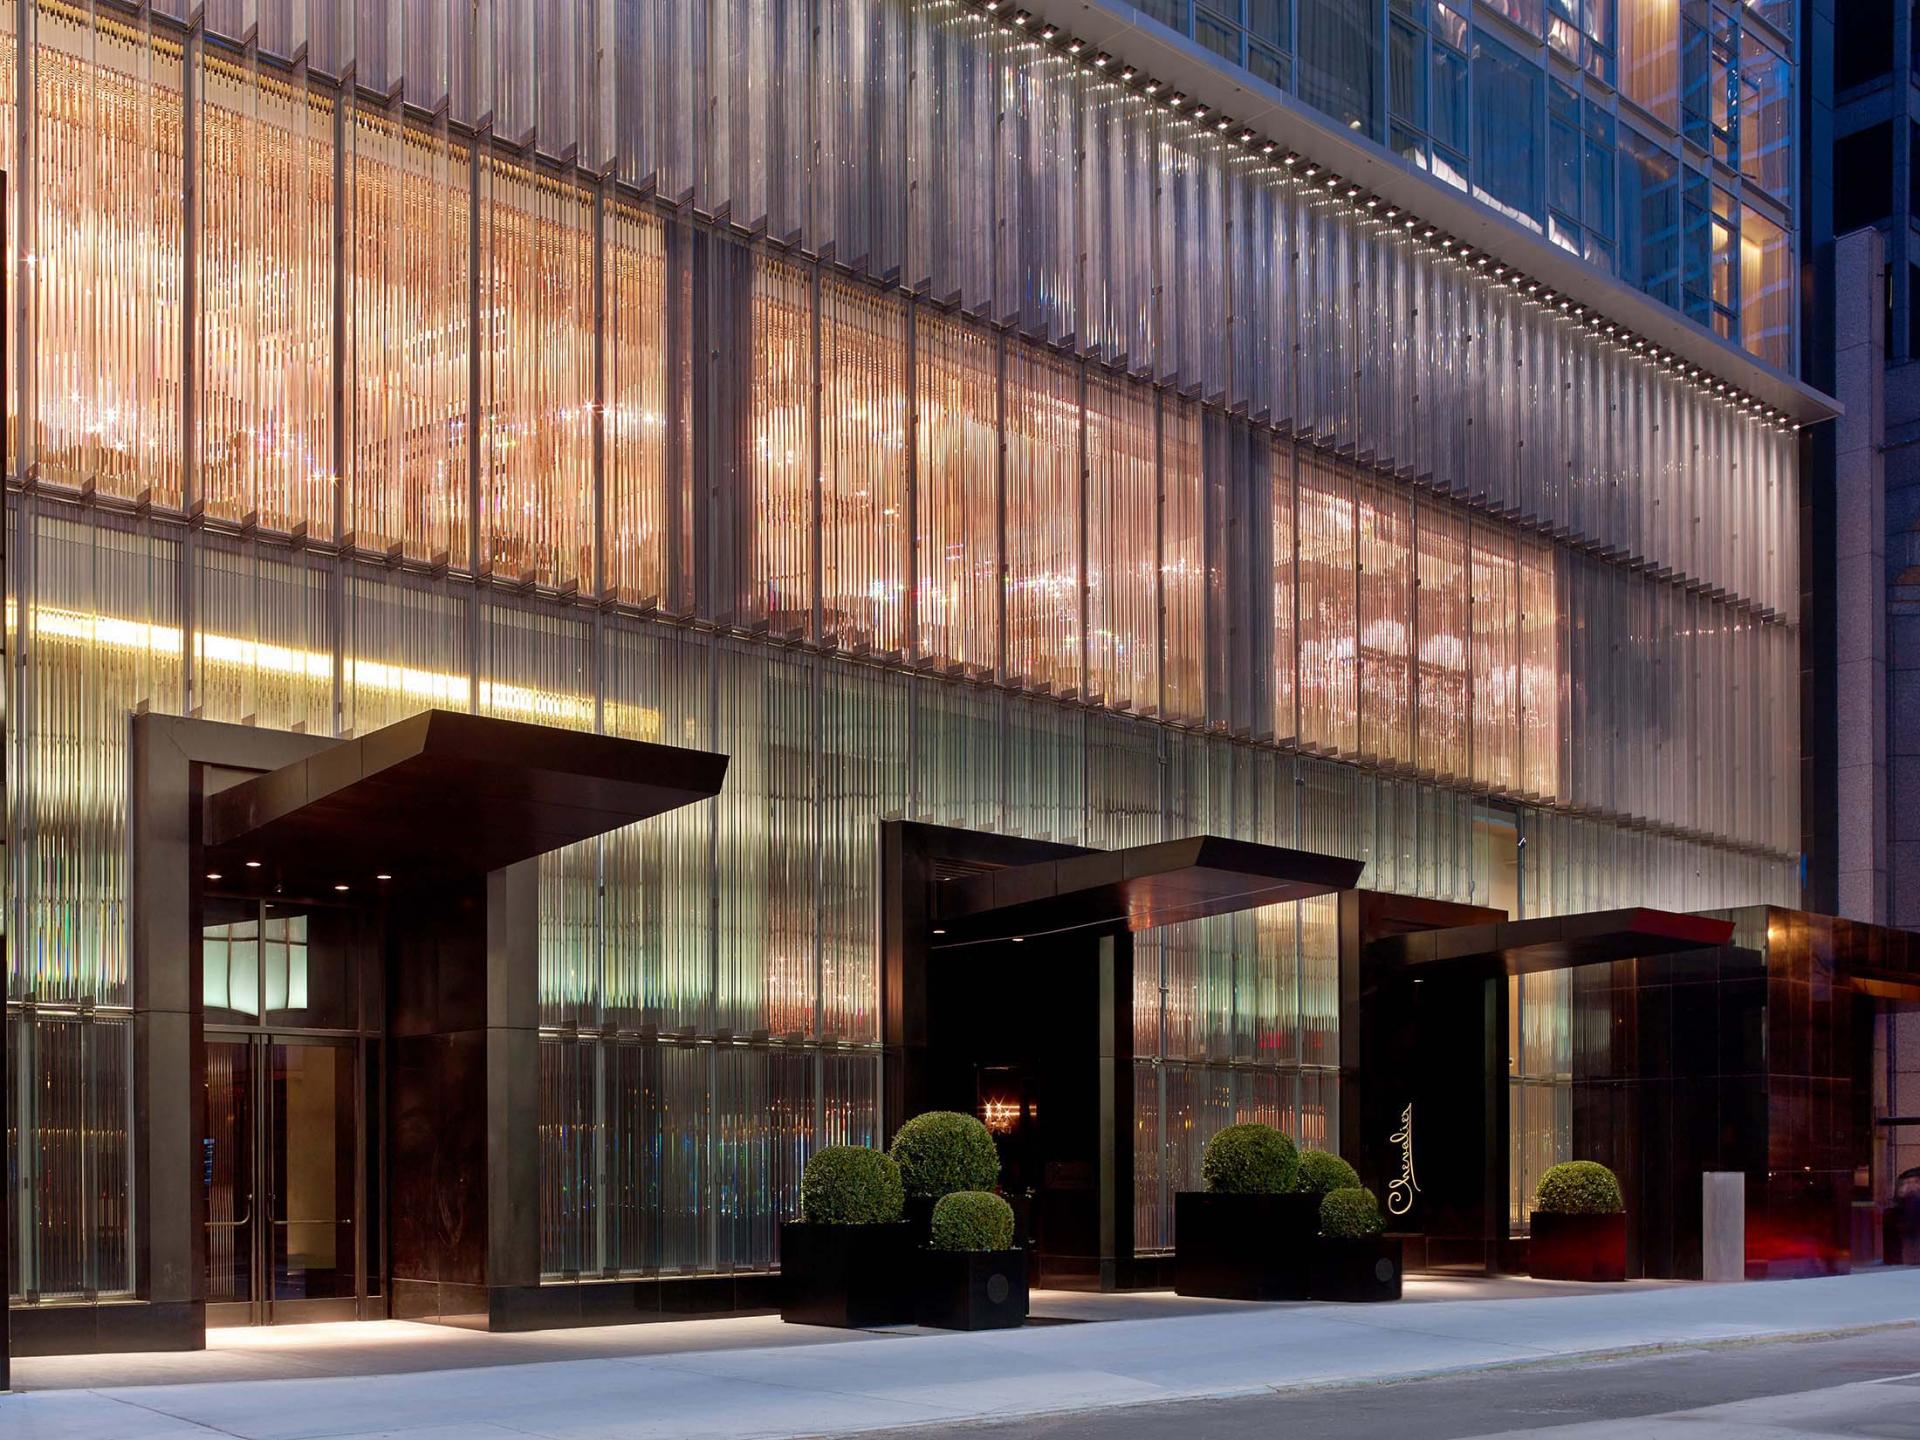 The entrance of the Baccarat Hotel in New York